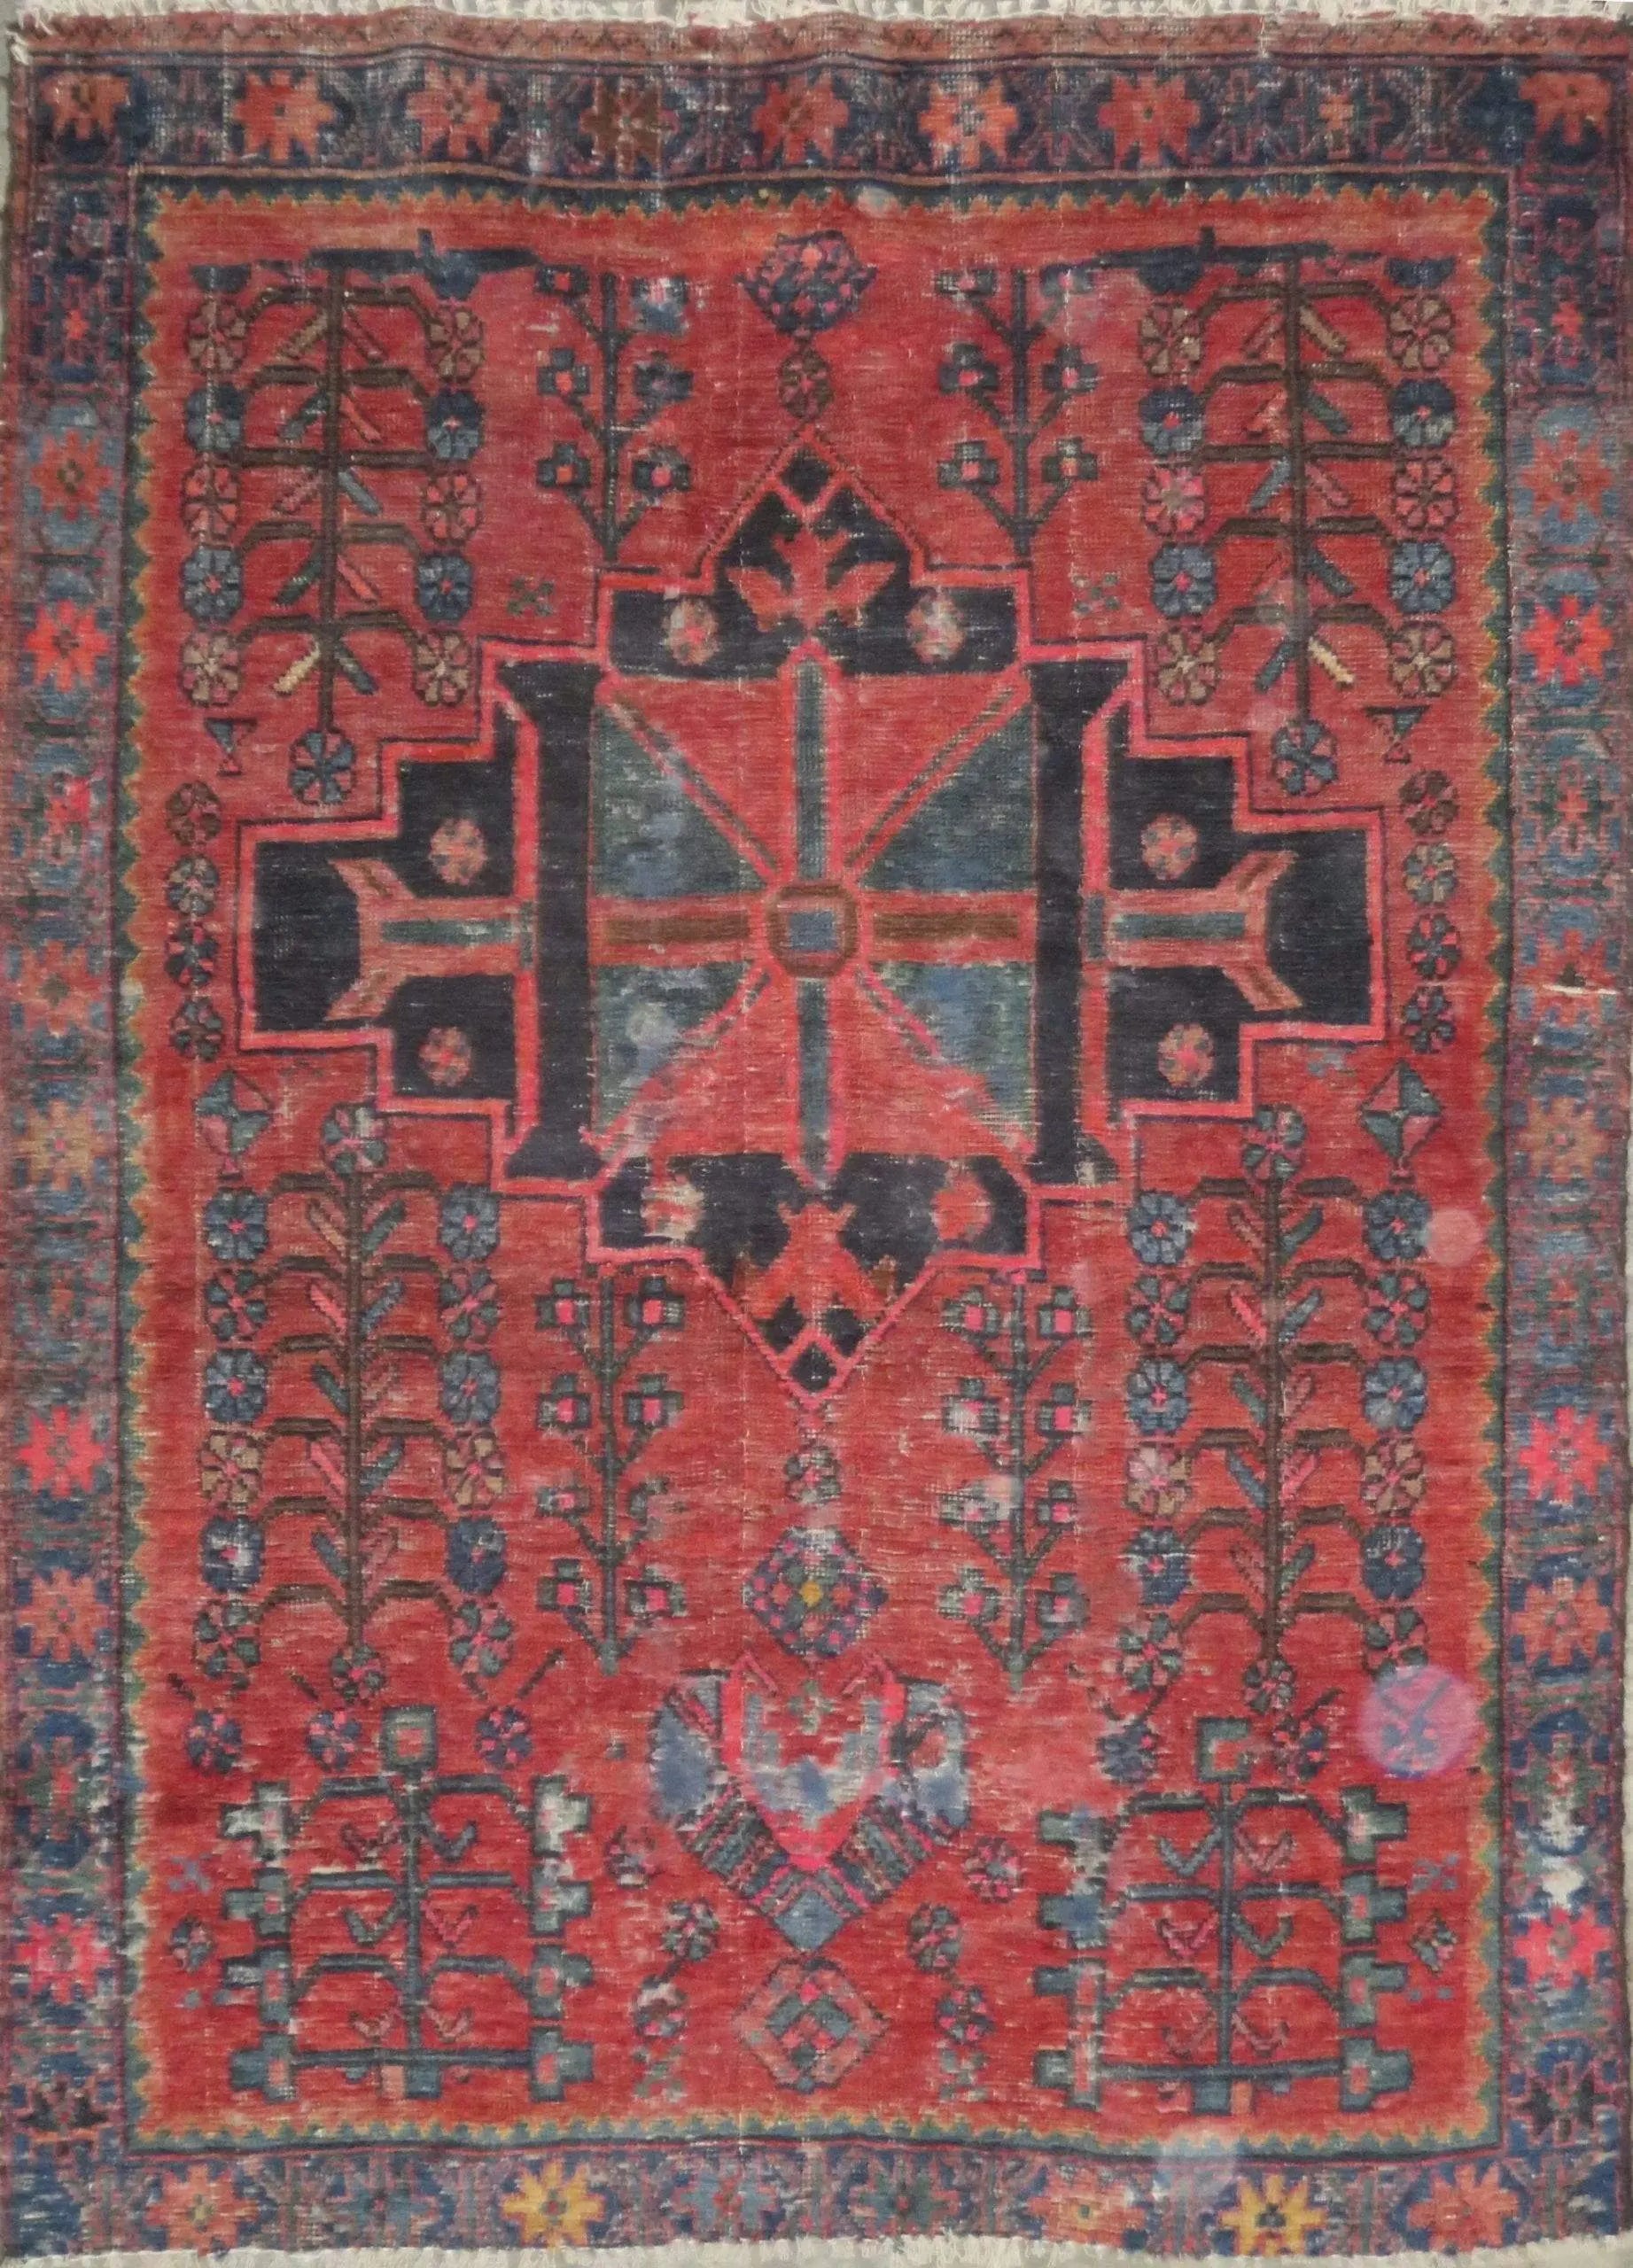 Hand-Knotted Persian Wool Rug _ Luxurious Vintage Design, 5'6" x 4'1", Artisan Crafted